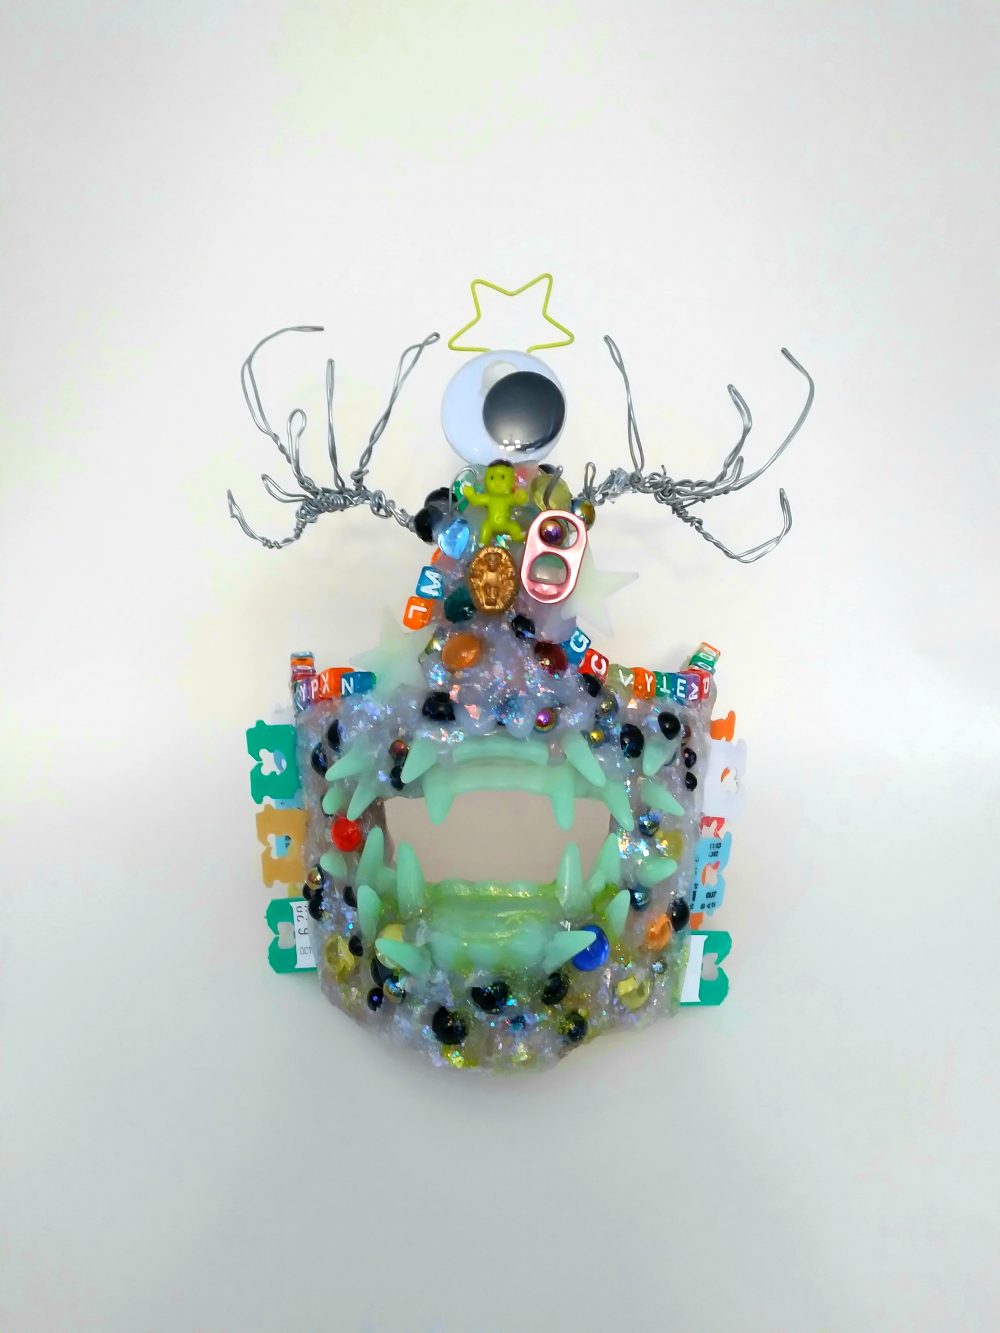 A sculpture of a glittery white monster mask, covered with an assortment of plastic and metal embellishments.